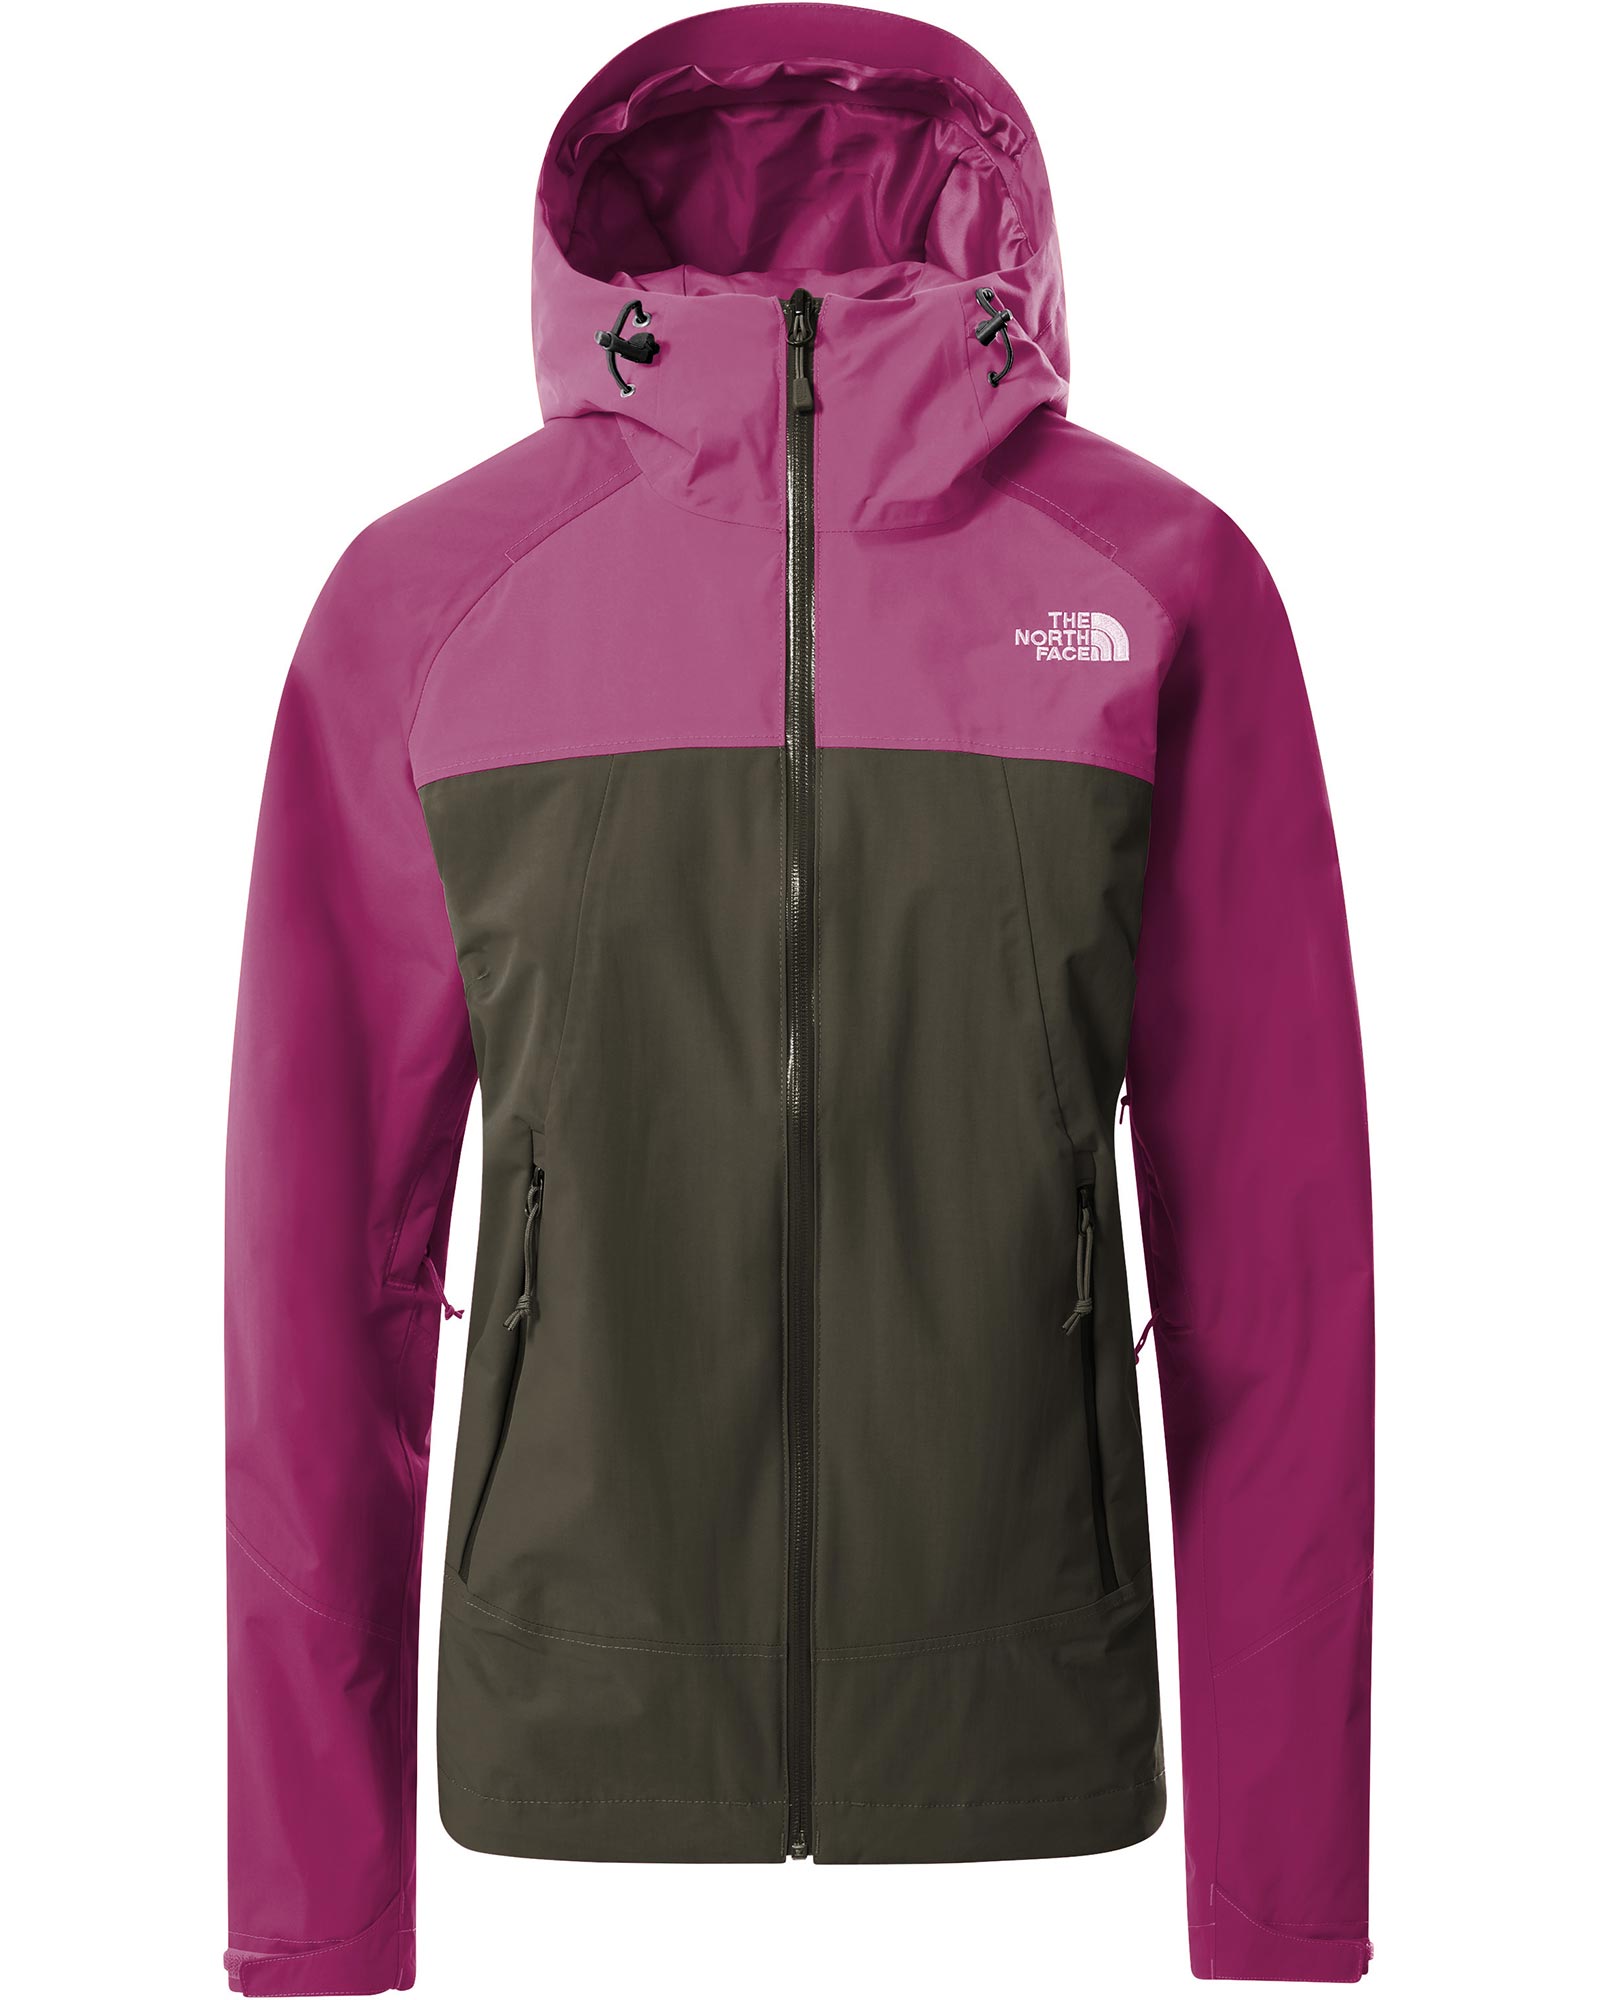 The North Face Stratos DryVent Women’s Jacket - New Taupe Green XS